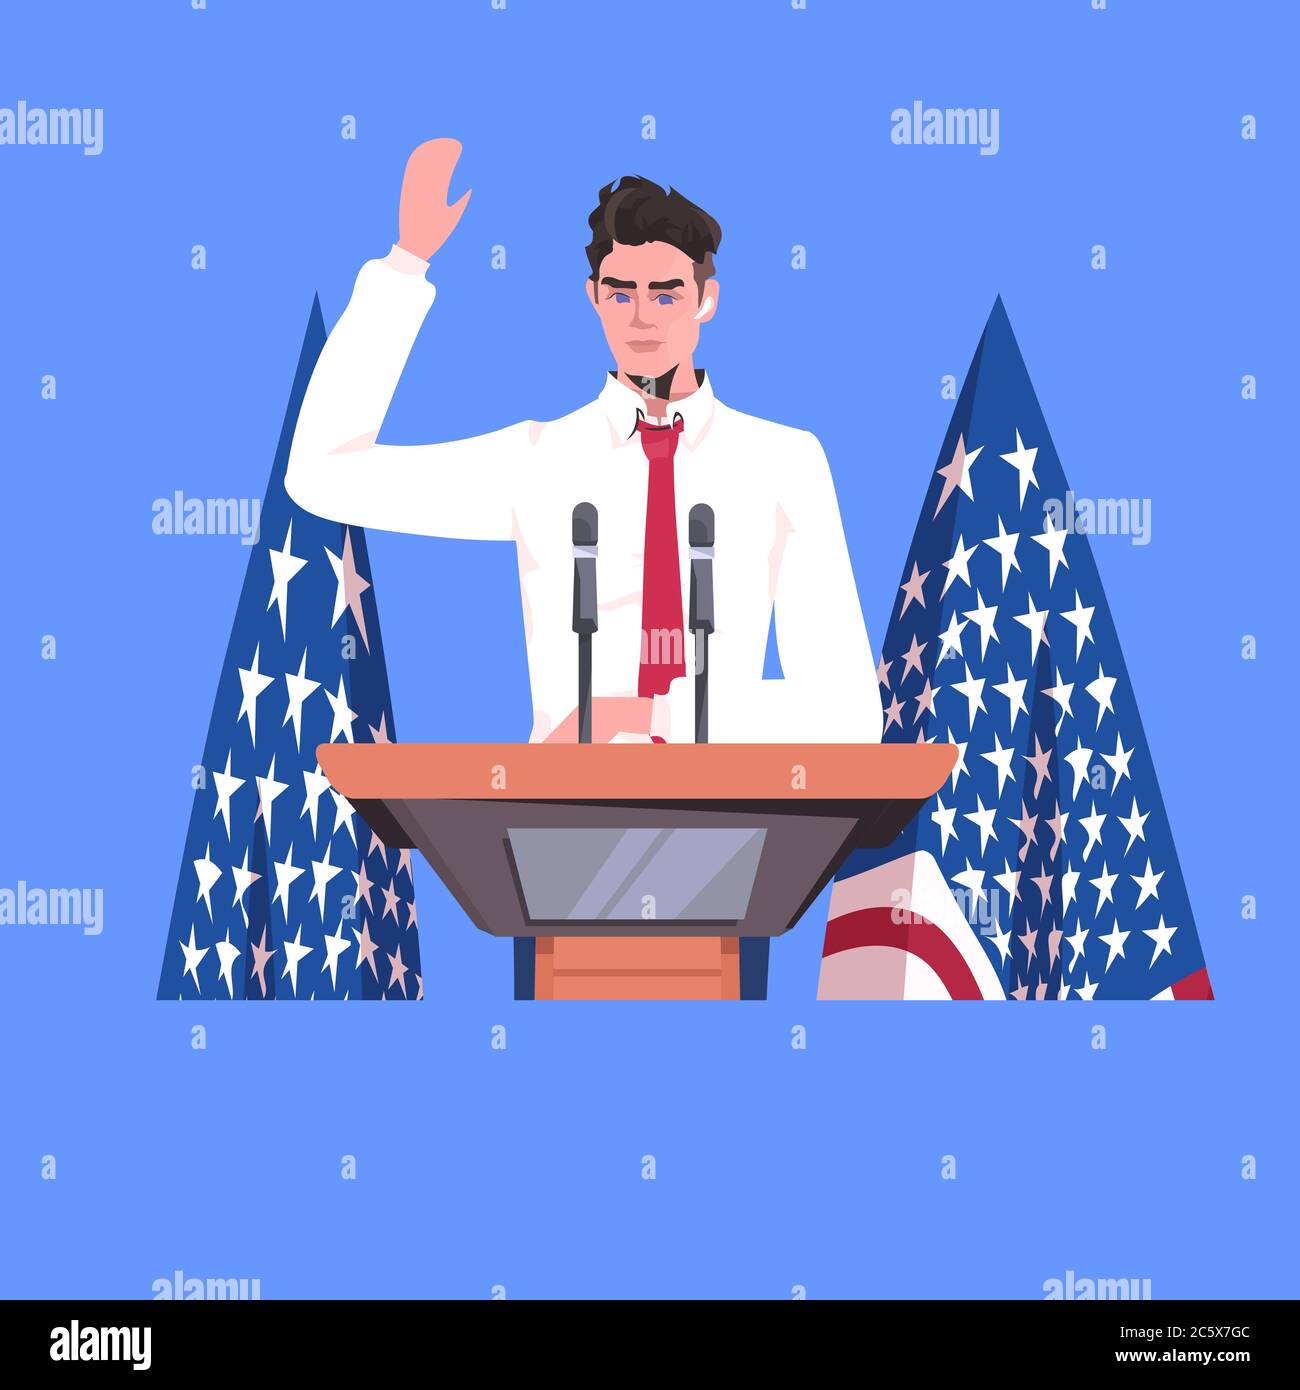 politician making speech from tribune with usa flag 4th of july american independence day celebration concept portrait vector illustration Stock Vector